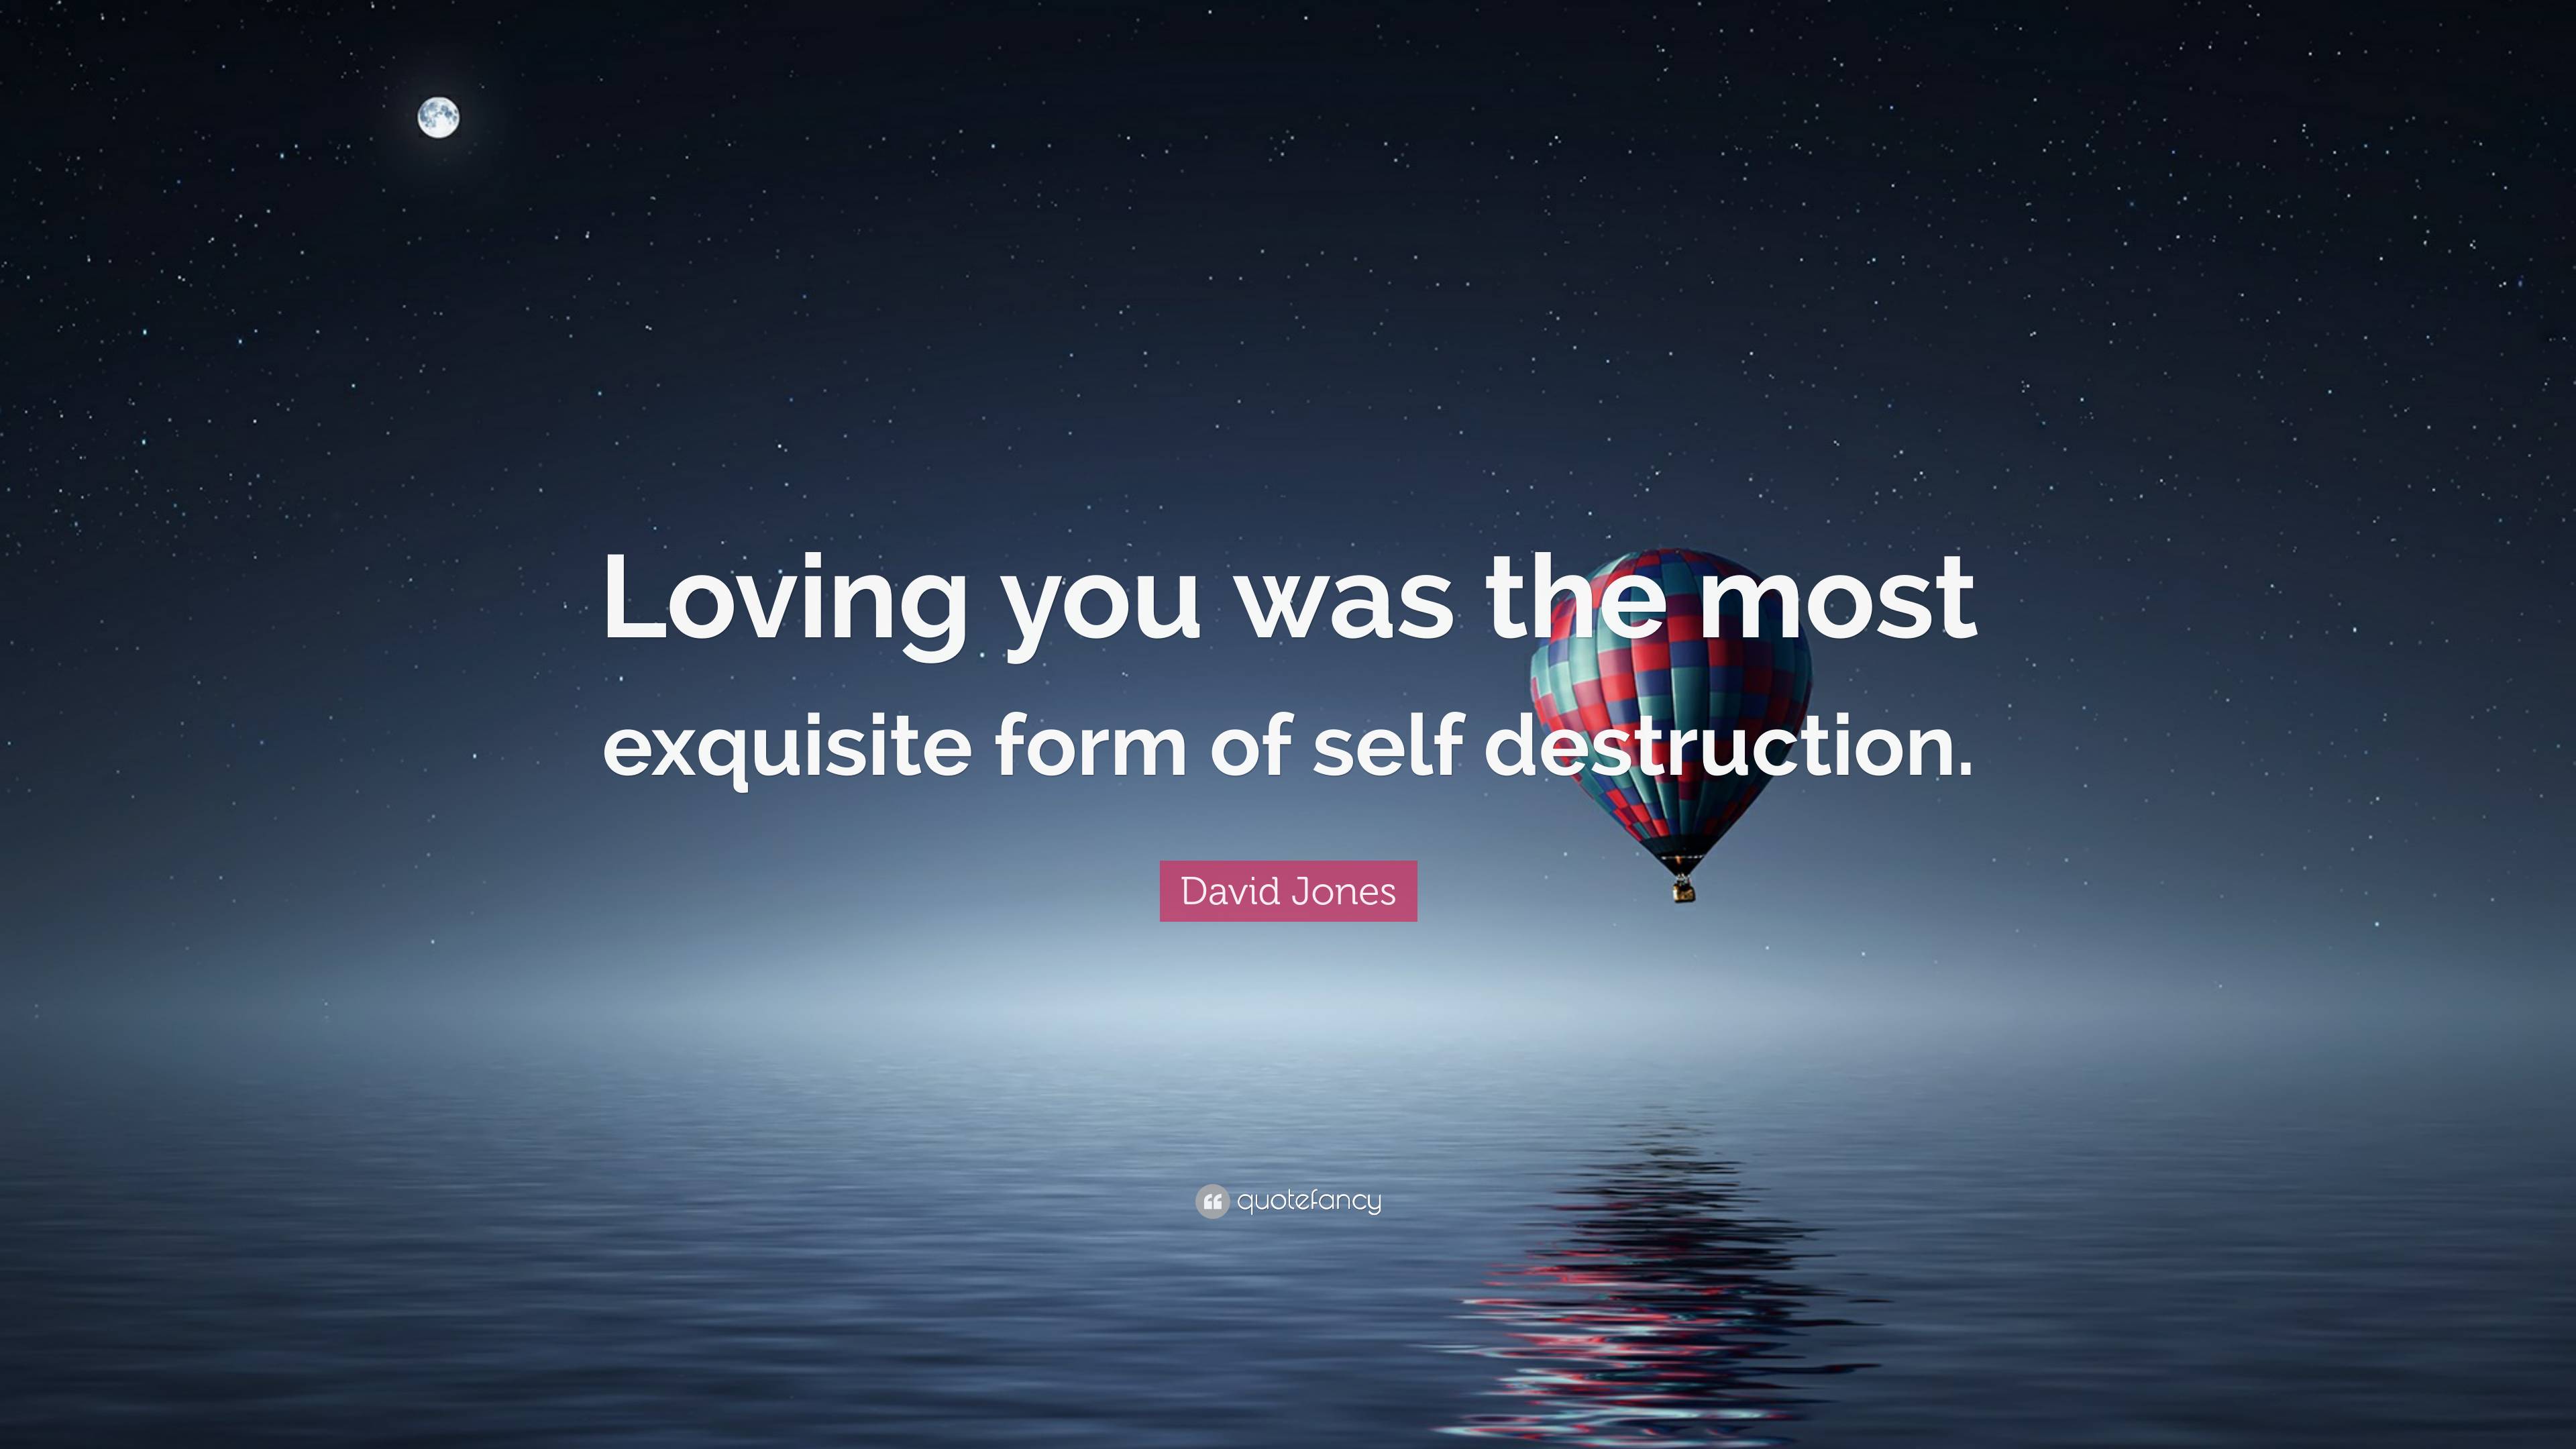 David Jones Quote: “Loving you was the most exquisite form of self